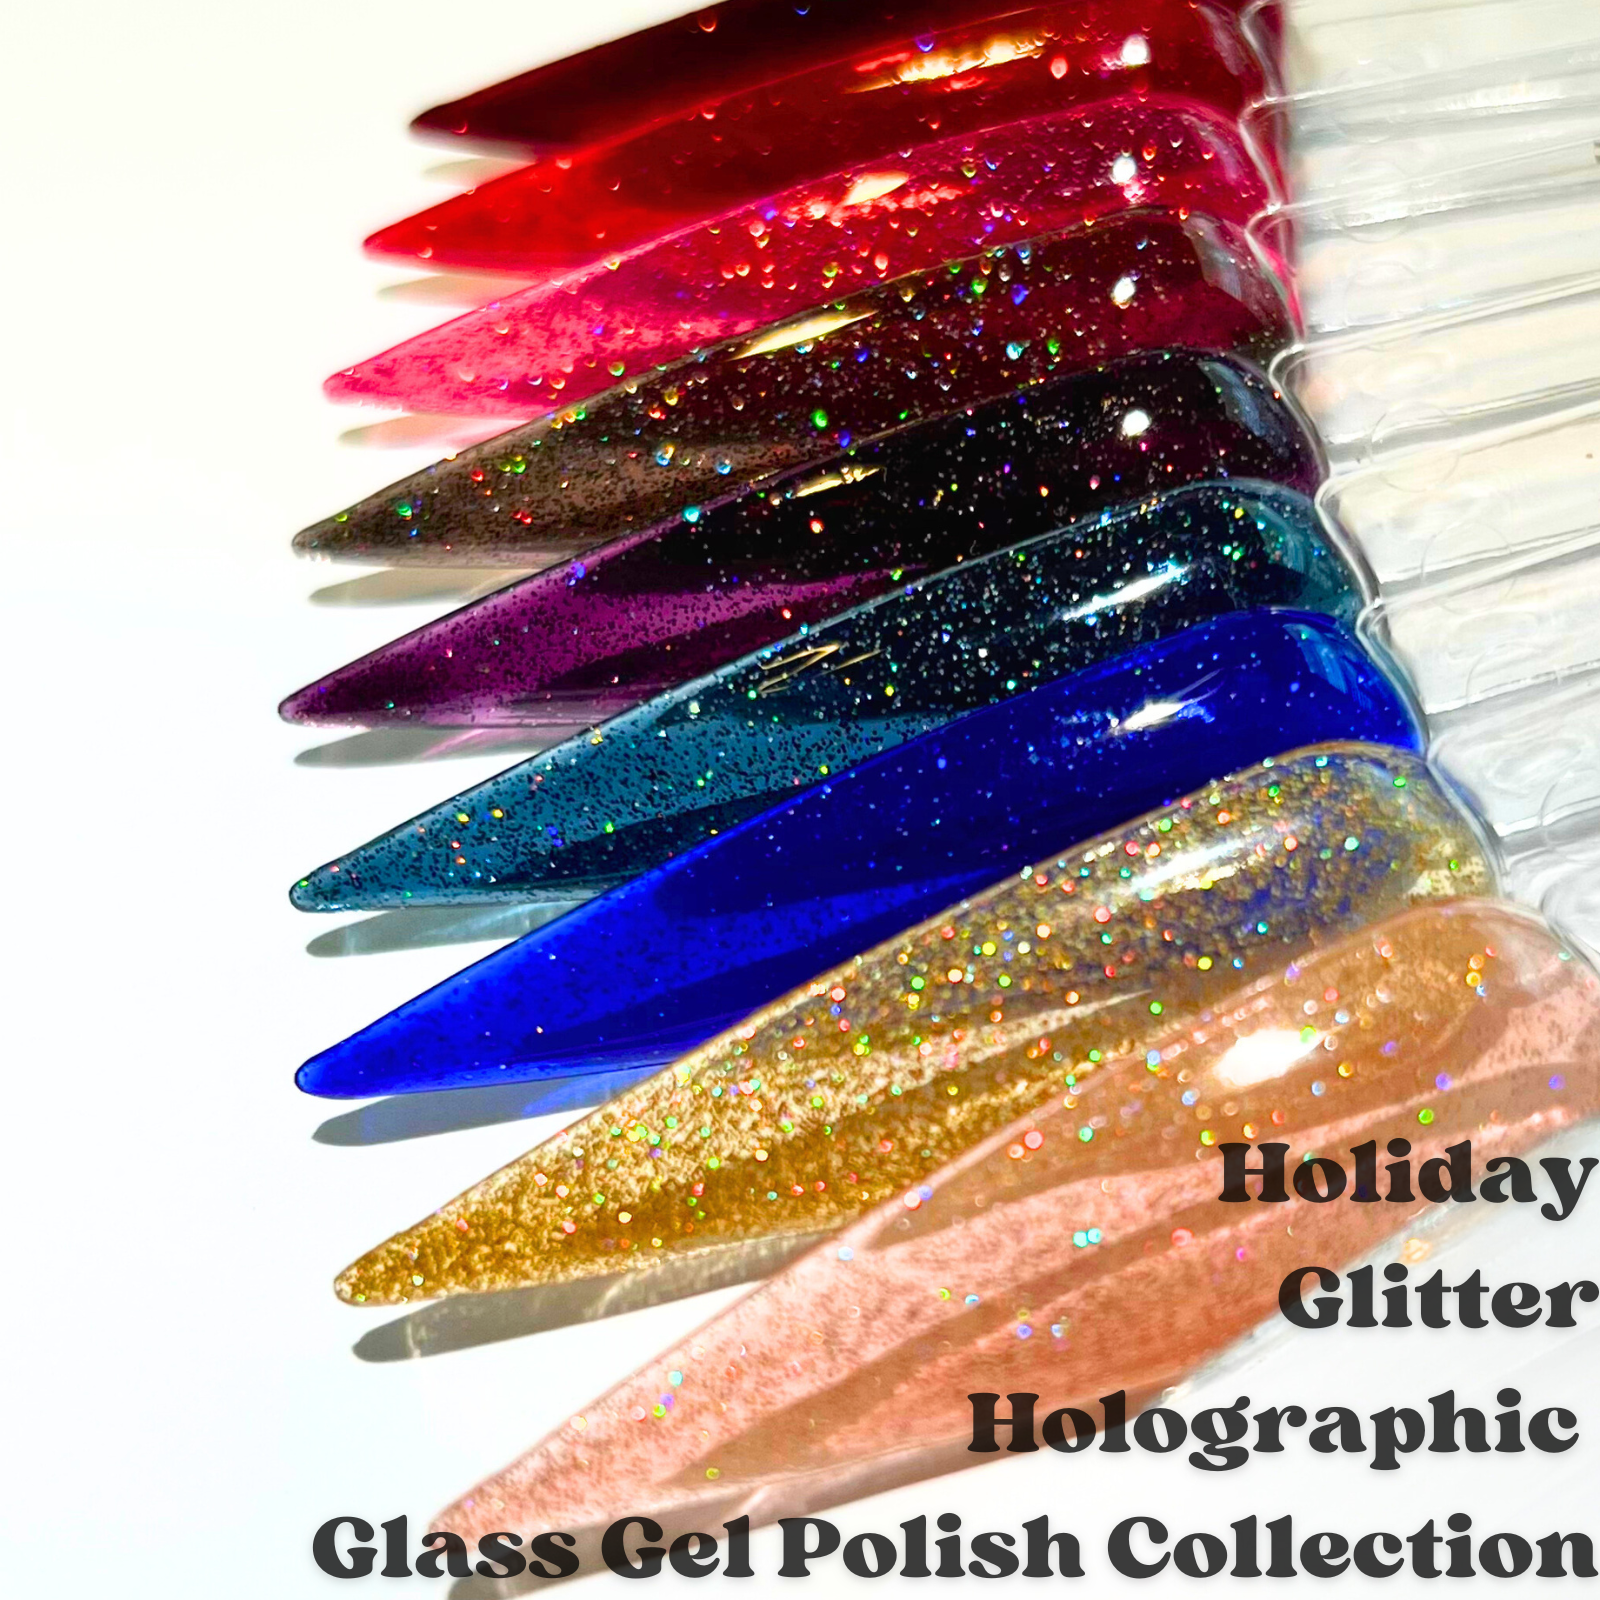 Glitter Holographic Glass Gel Polish Collection